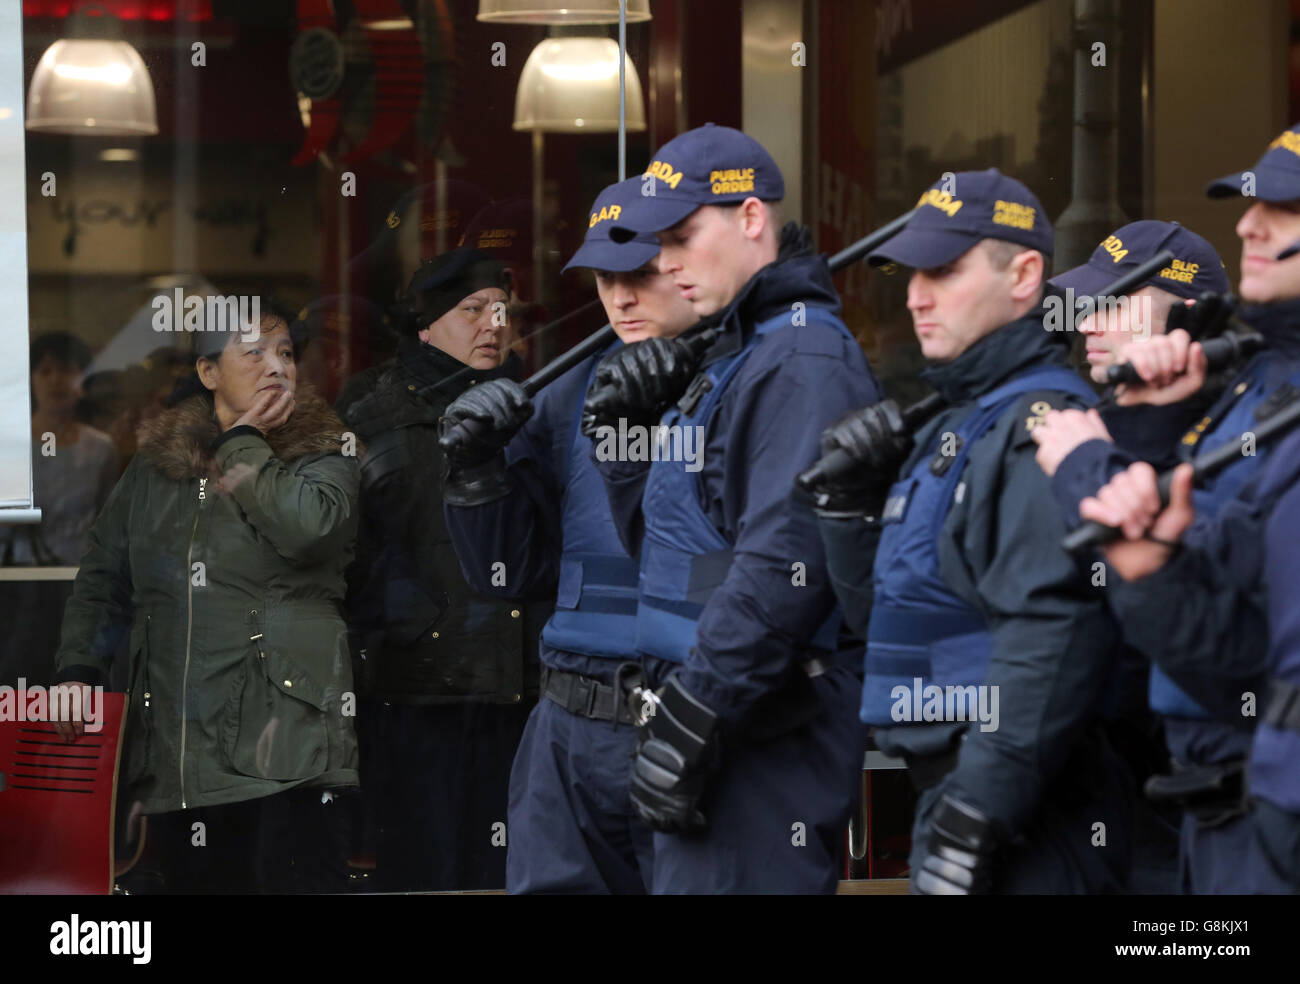 Patrons look on from inside a Burger King restaurant in Dublin city centre as members of the Garda Public Order Unit confront anti-racism protesters during a counter demonstration against the launch of an Irish branch of Pegida, the far-right movement from Germany. Stock Photo